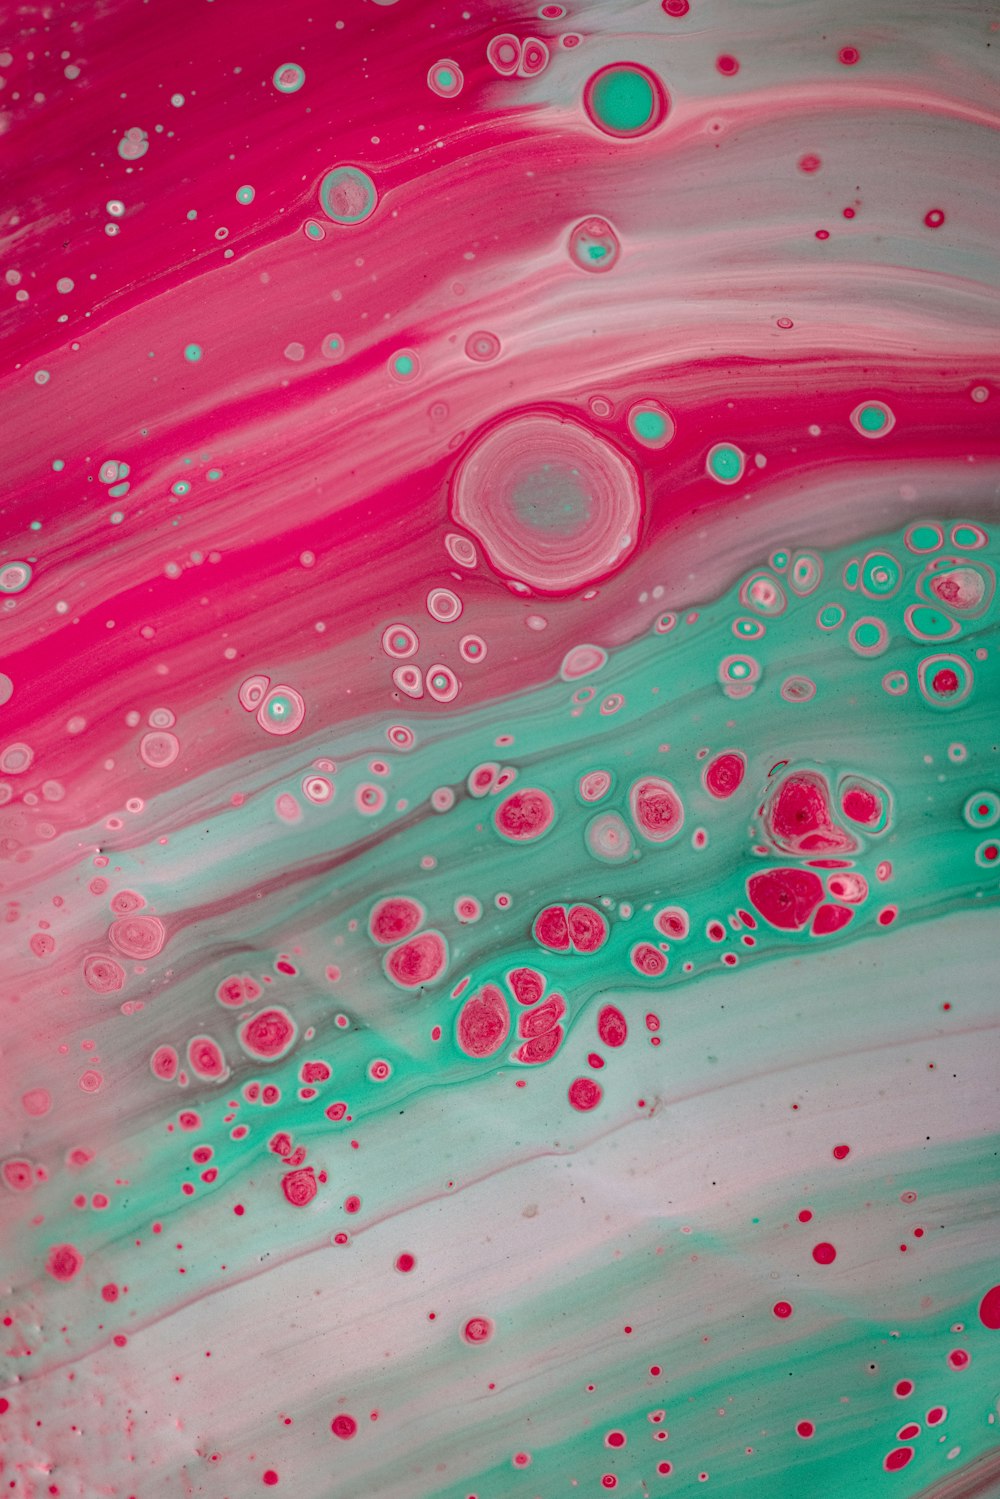 a close up of a pink and green liquid